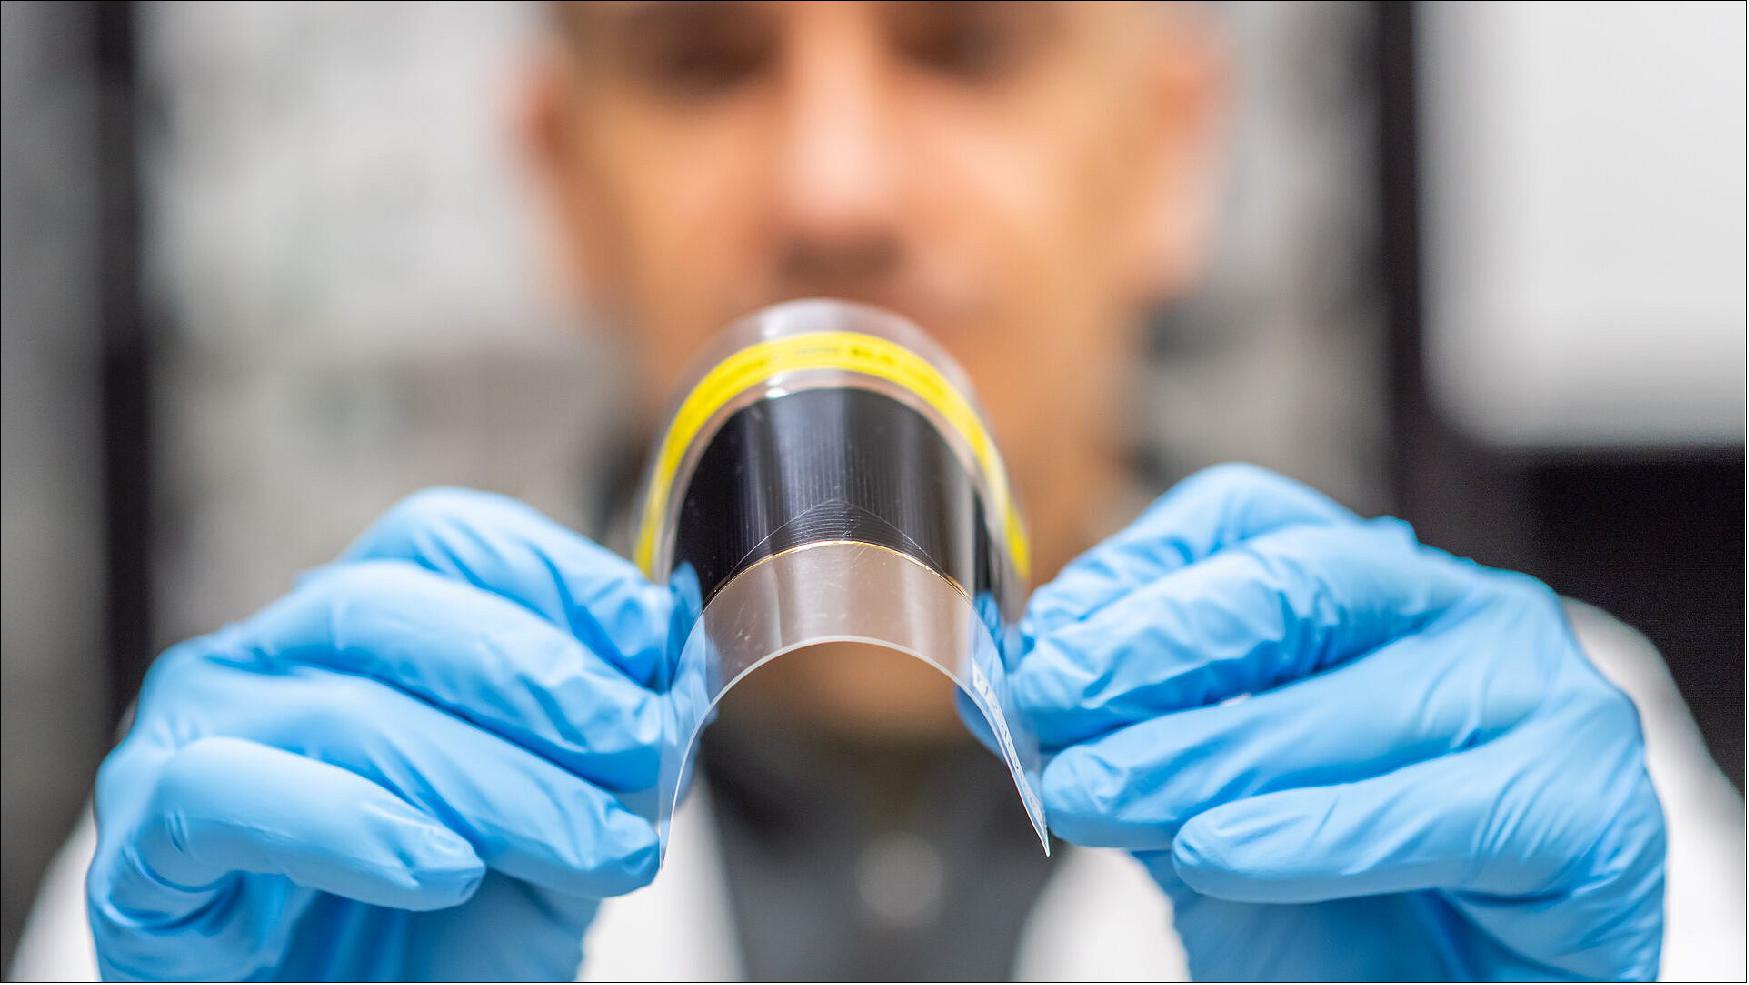 Figure 35: Just about 0.02 mm thick – thinner than a human hair – the prototype solar cells were developed by Azur Space Solar Power in Germany and tf2 in the Netherlands; the cell seen here is from tf2. The project was backed through ESA’s Technology Development Element, investigating novel technologies for space (image credit: ESA–SJM Photography)